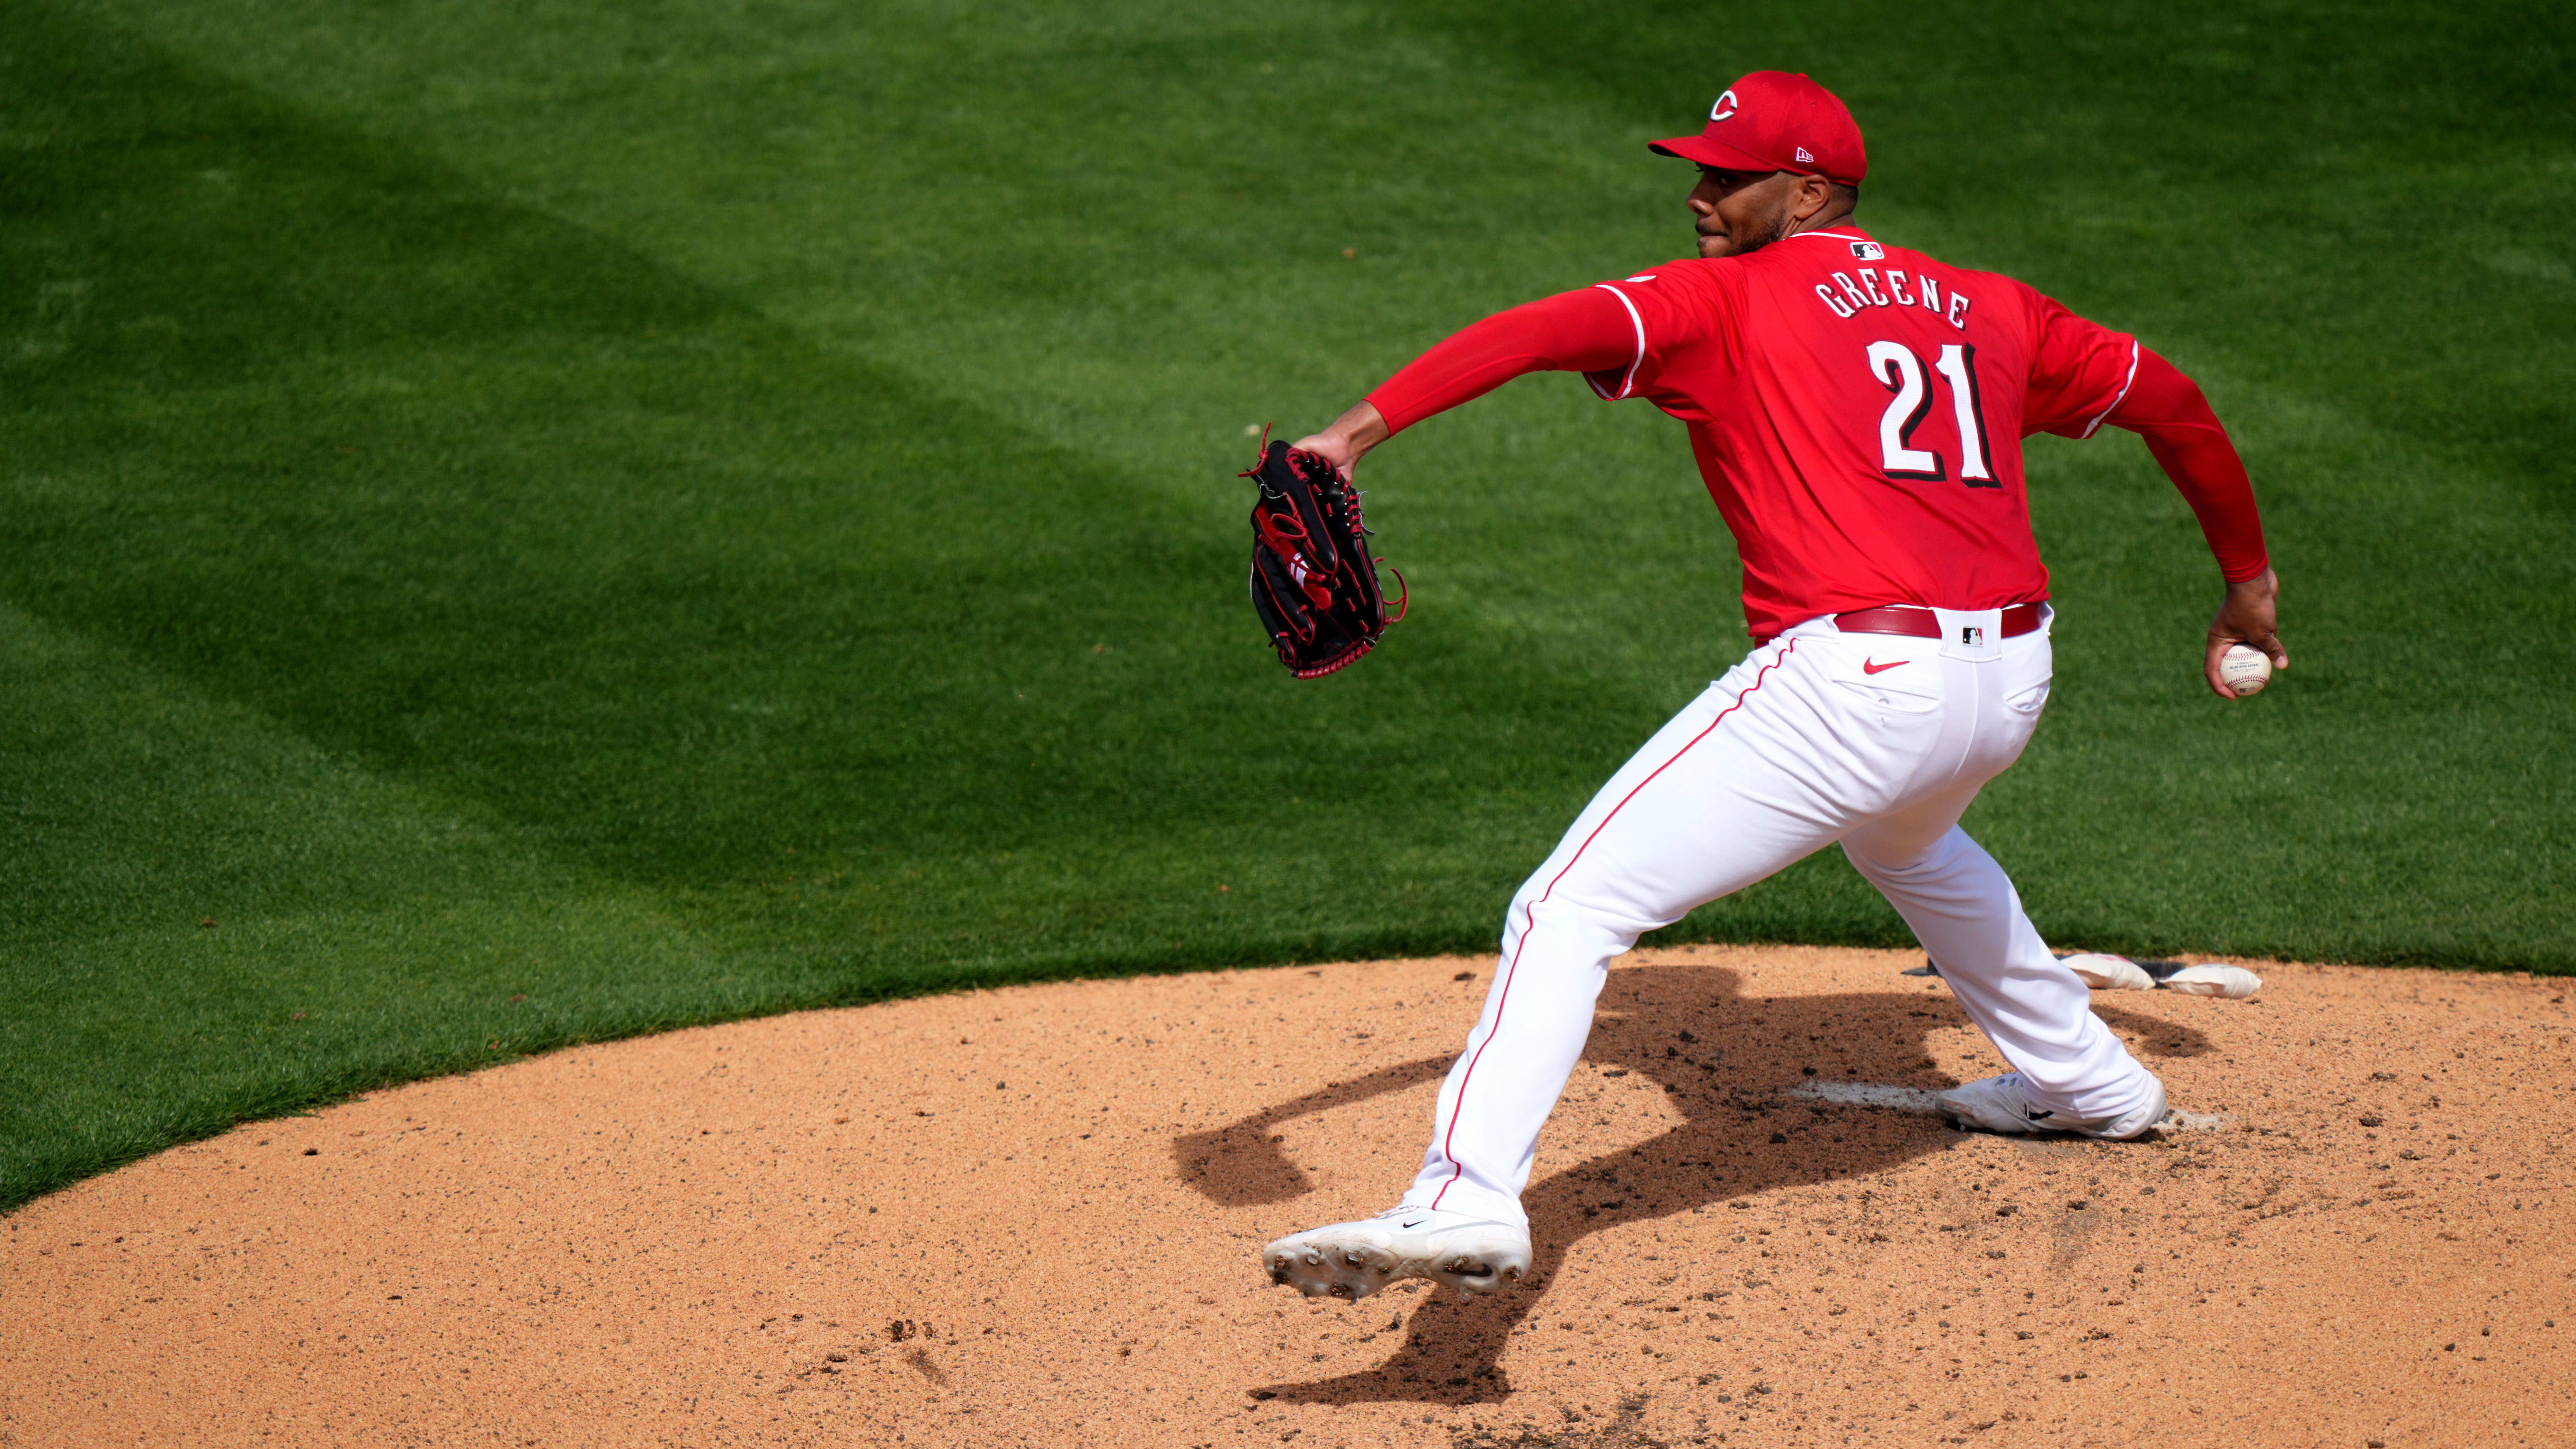 Cincinnati Reds starting pitcher Hunter Greene (21) delivers a pitch in a Spring Training game.